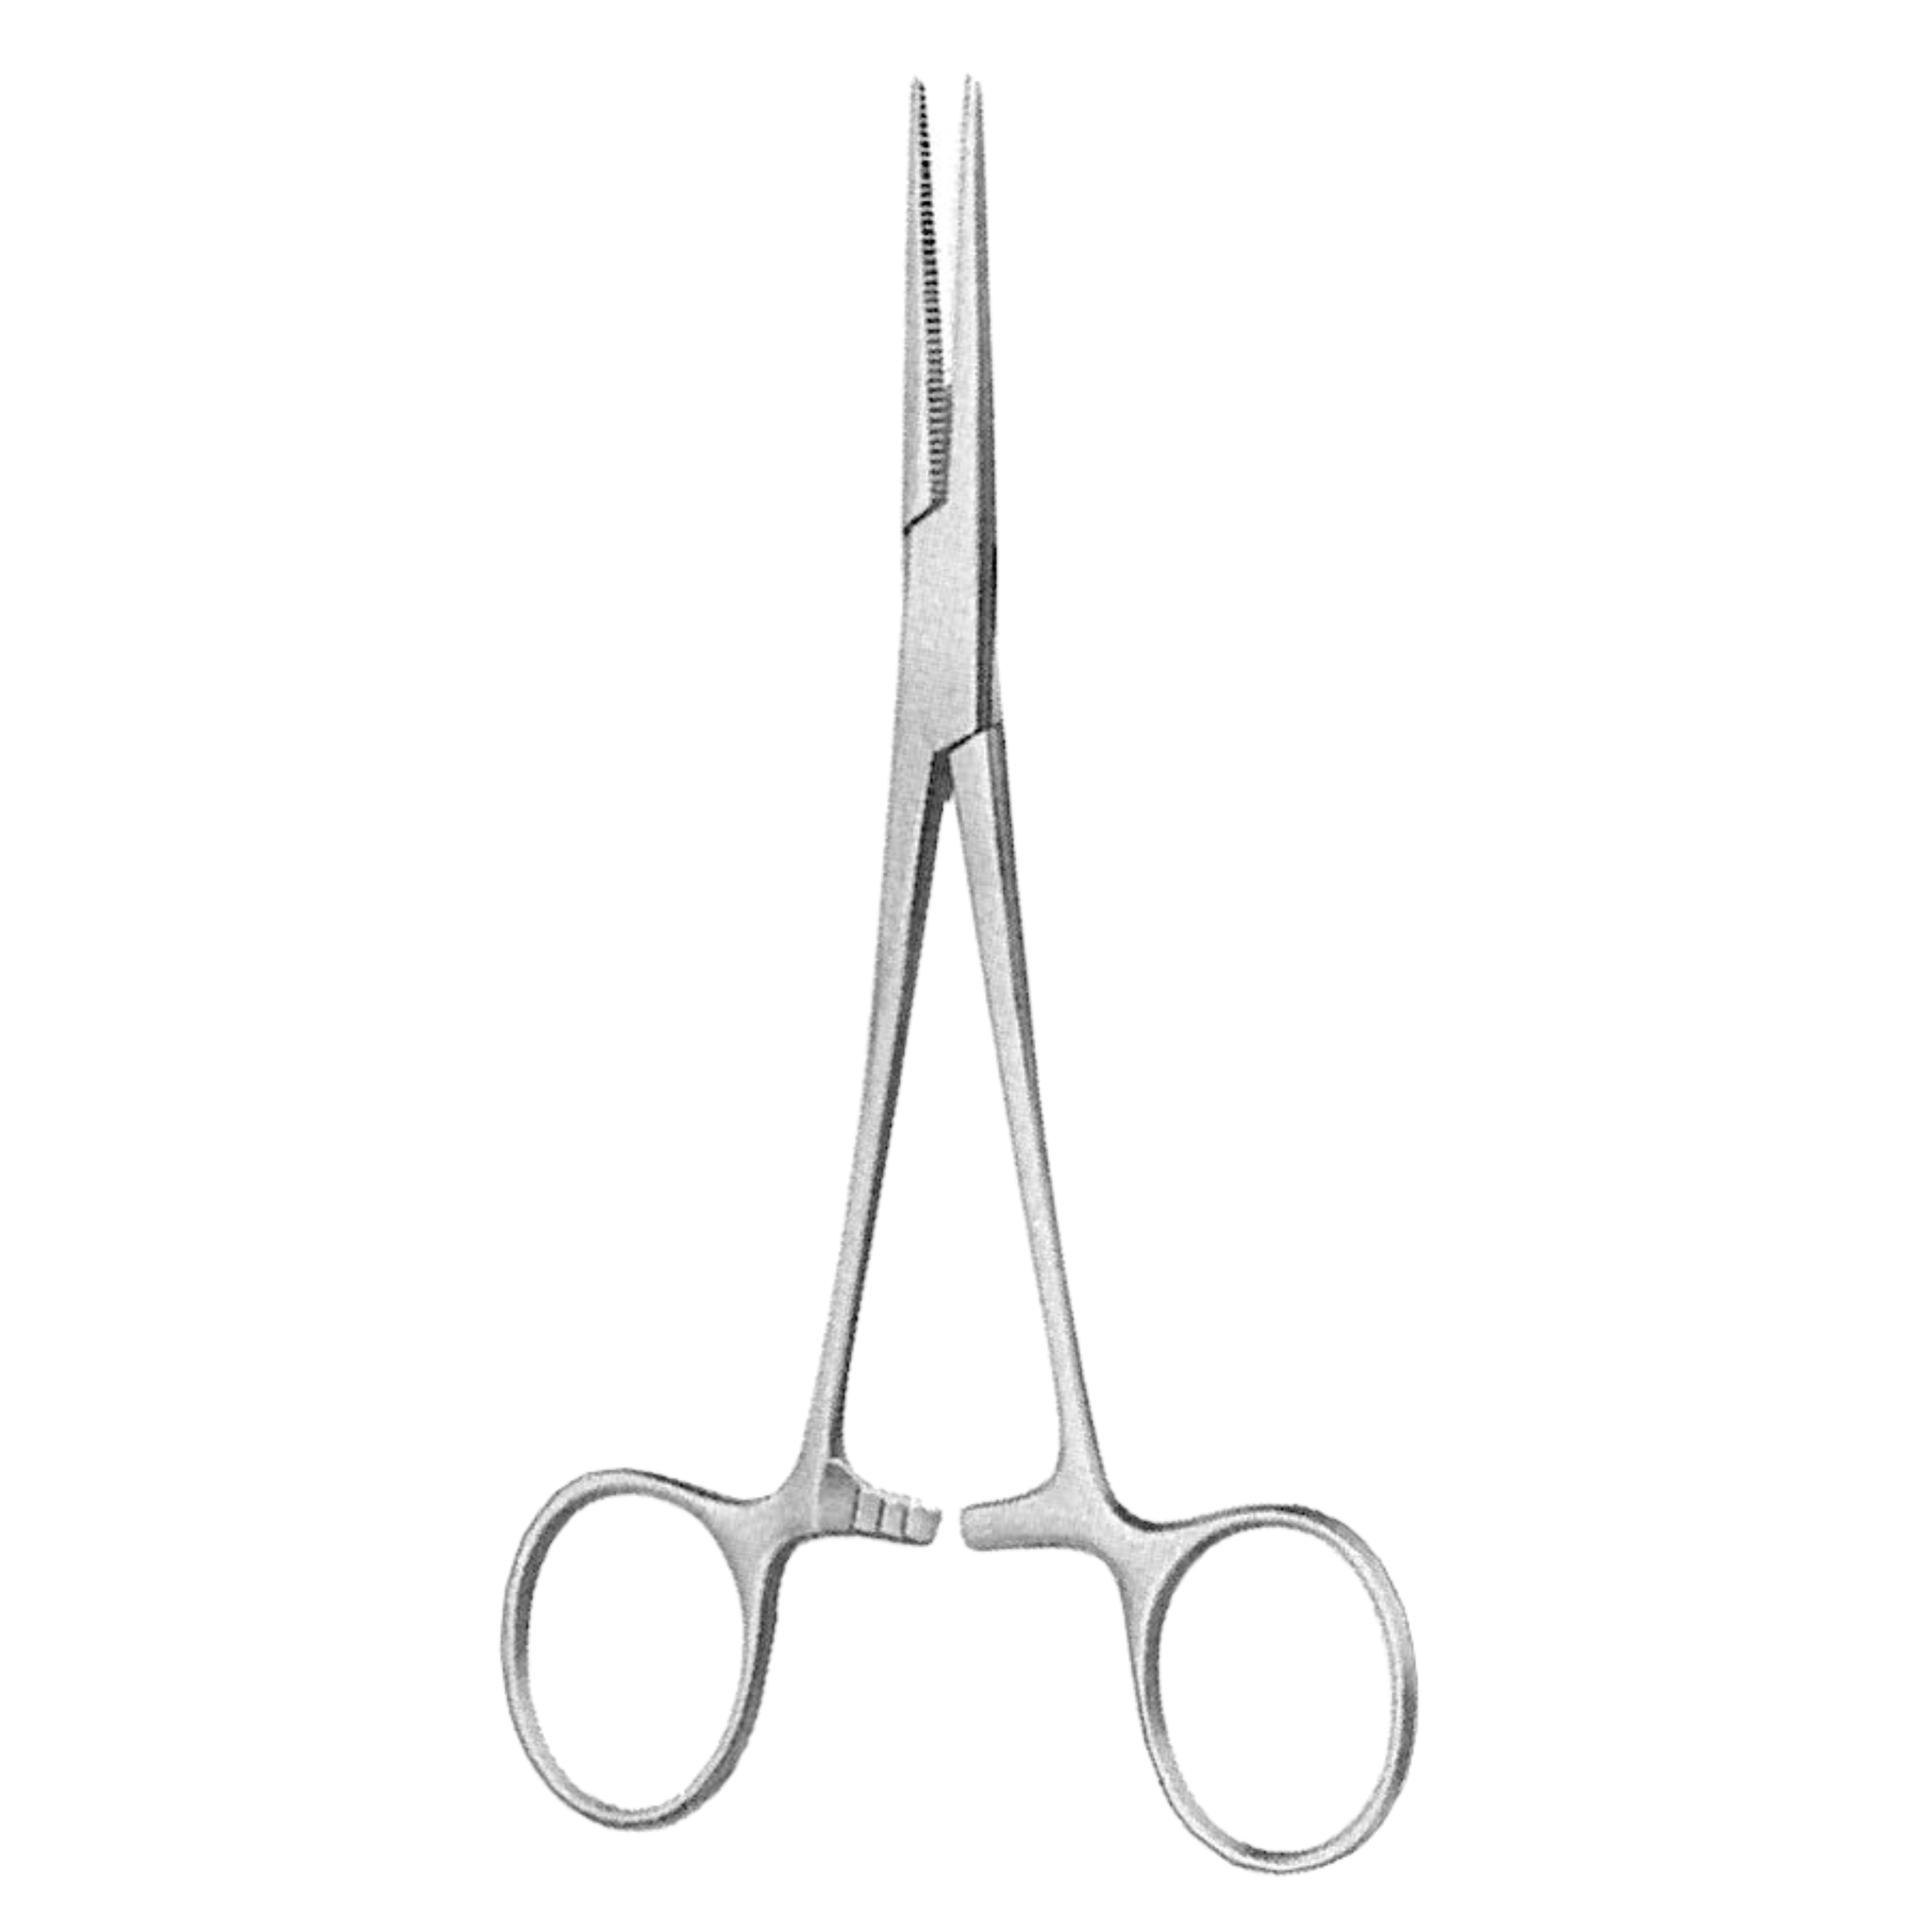 Crile Artery Forceps- Curved, 14 cm